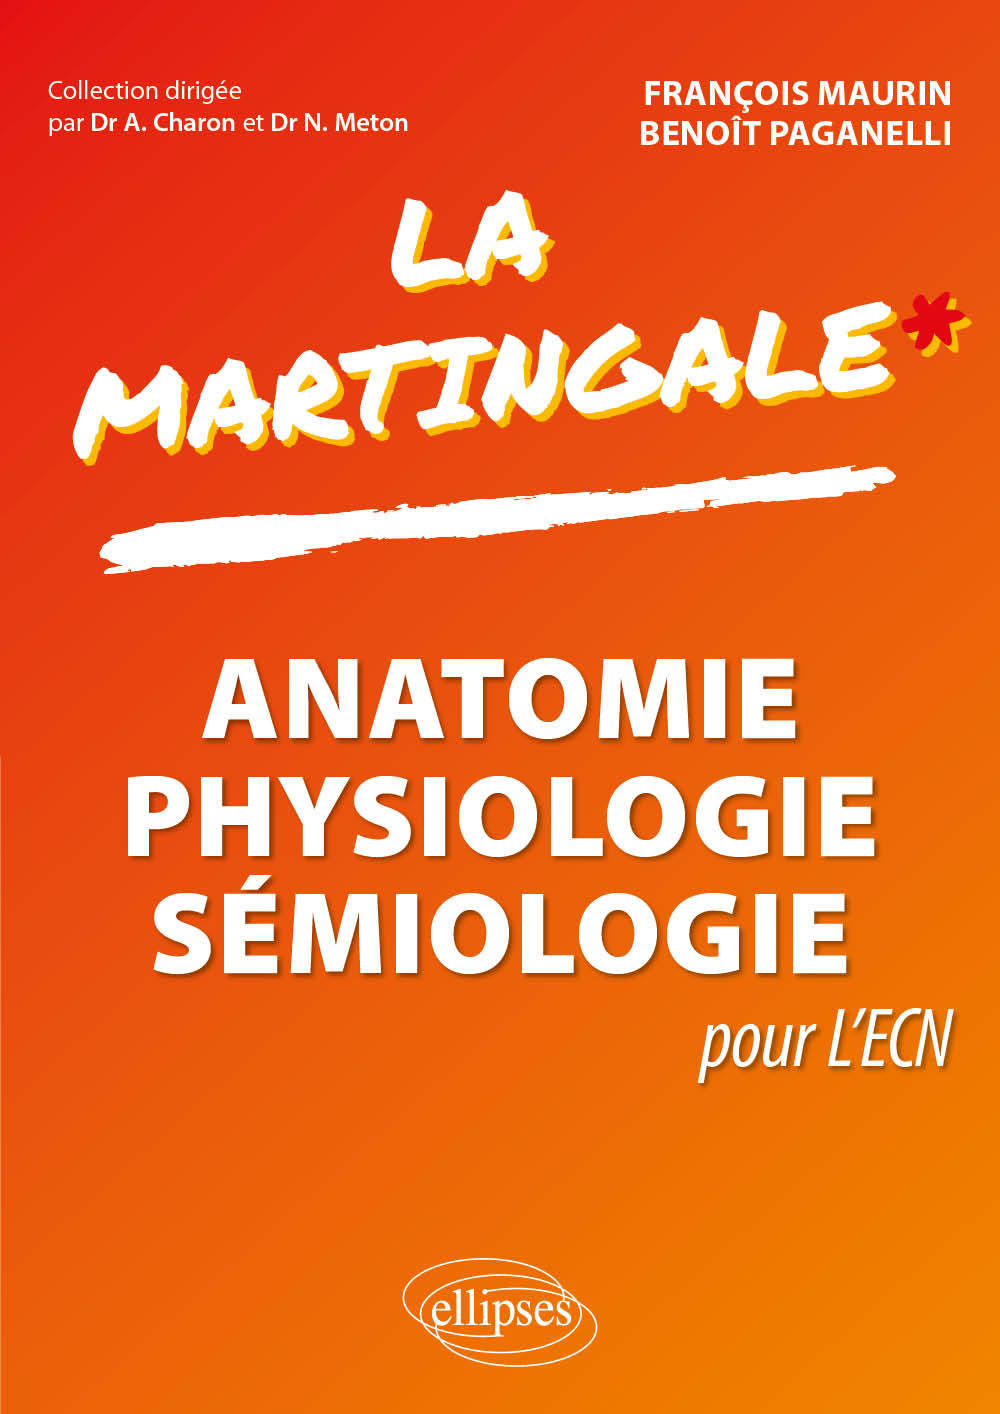 Book Anatomie – Physiologie – Sémiologie pour l’EDN Maurin